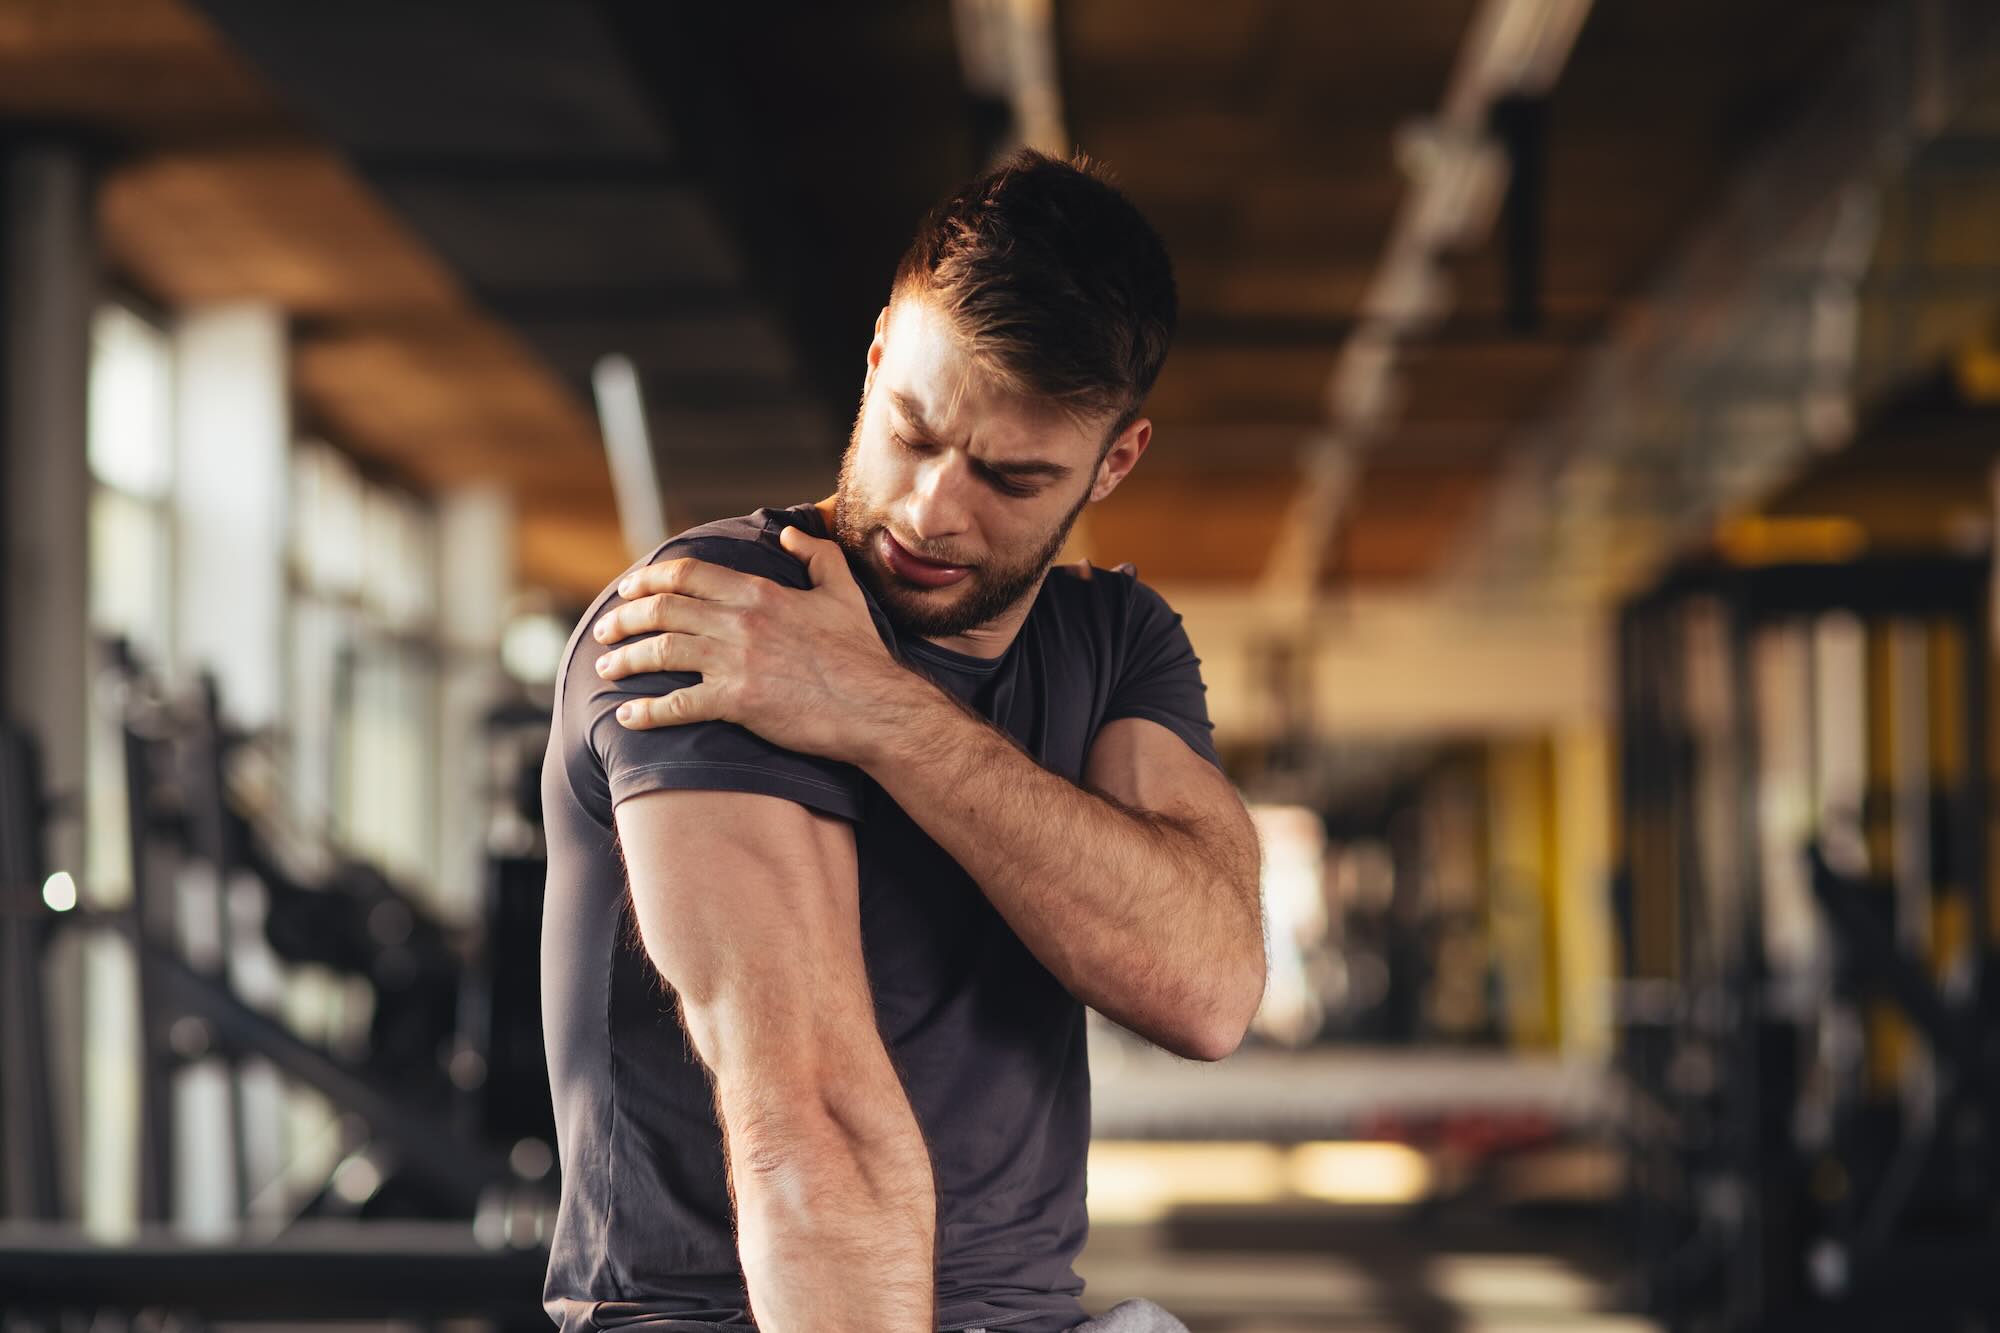 How to Tell If You Have a Rotator Cuff Tear